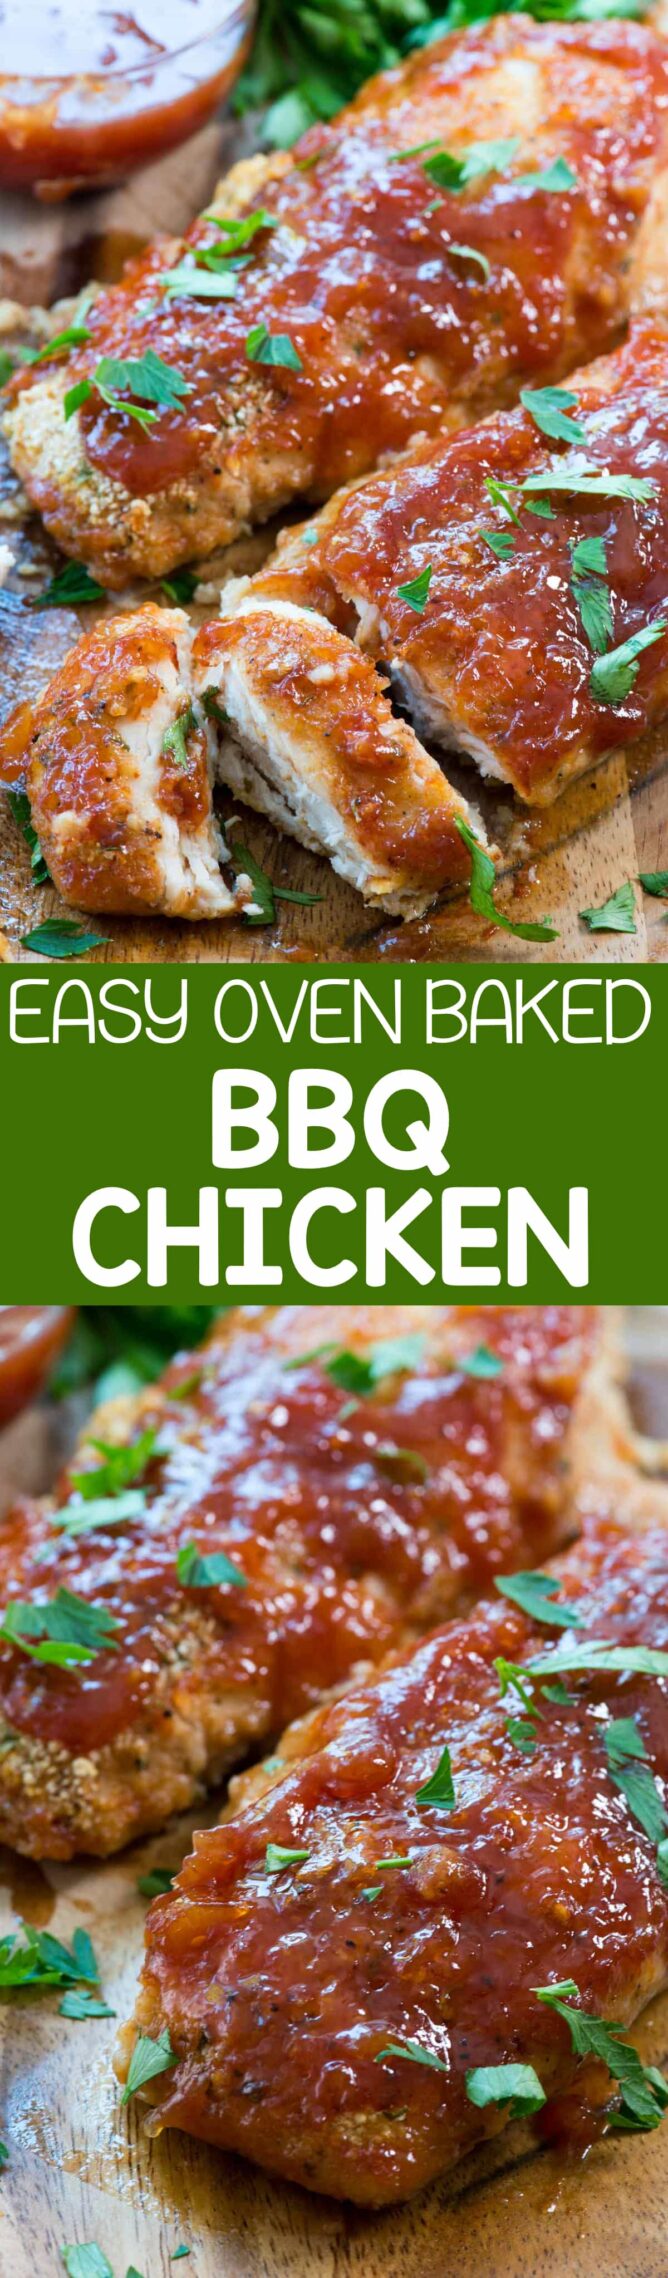 oven baked bbq chicken collage